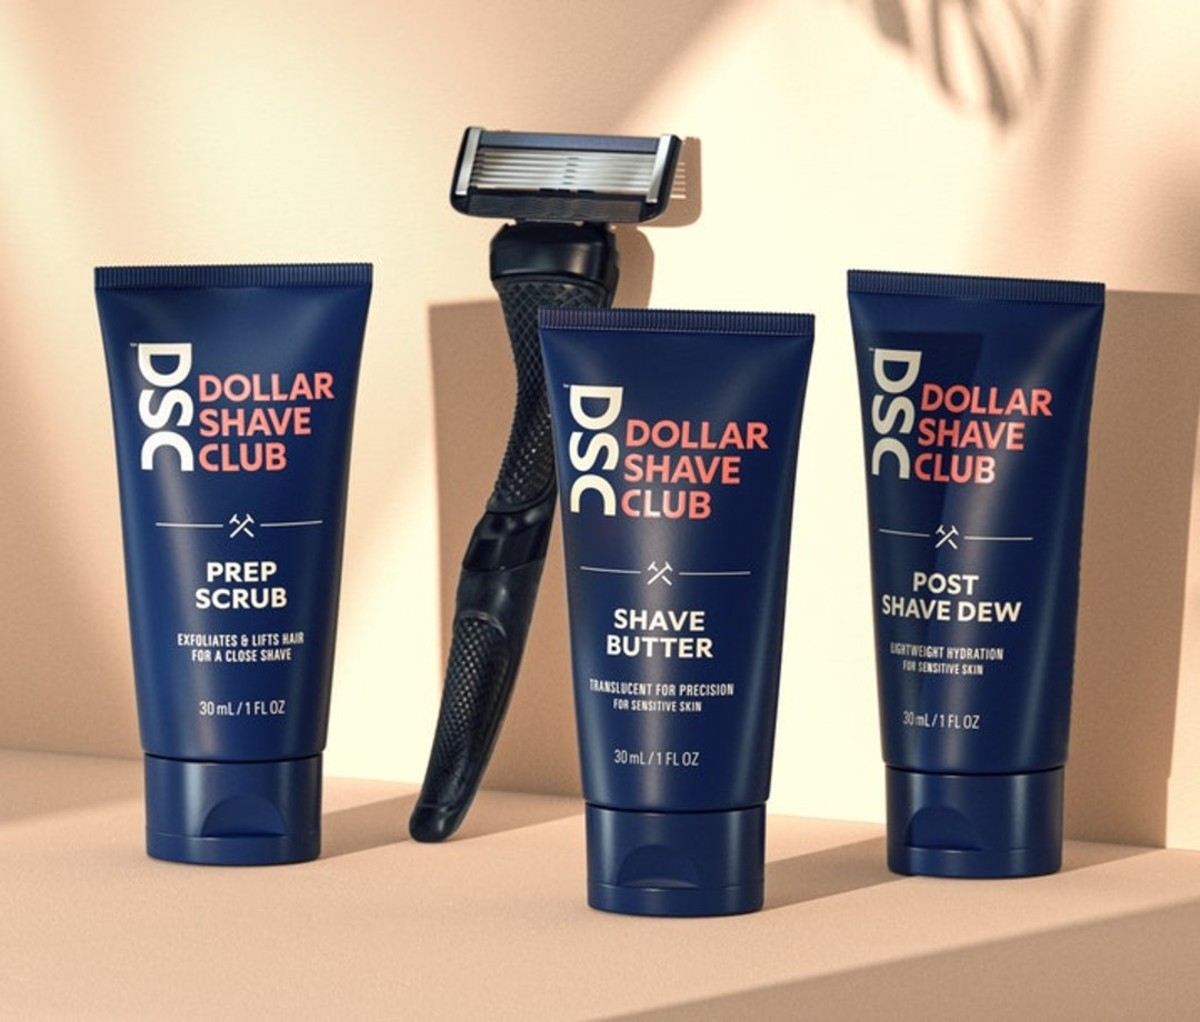 The Dollar Shave Club Subscription